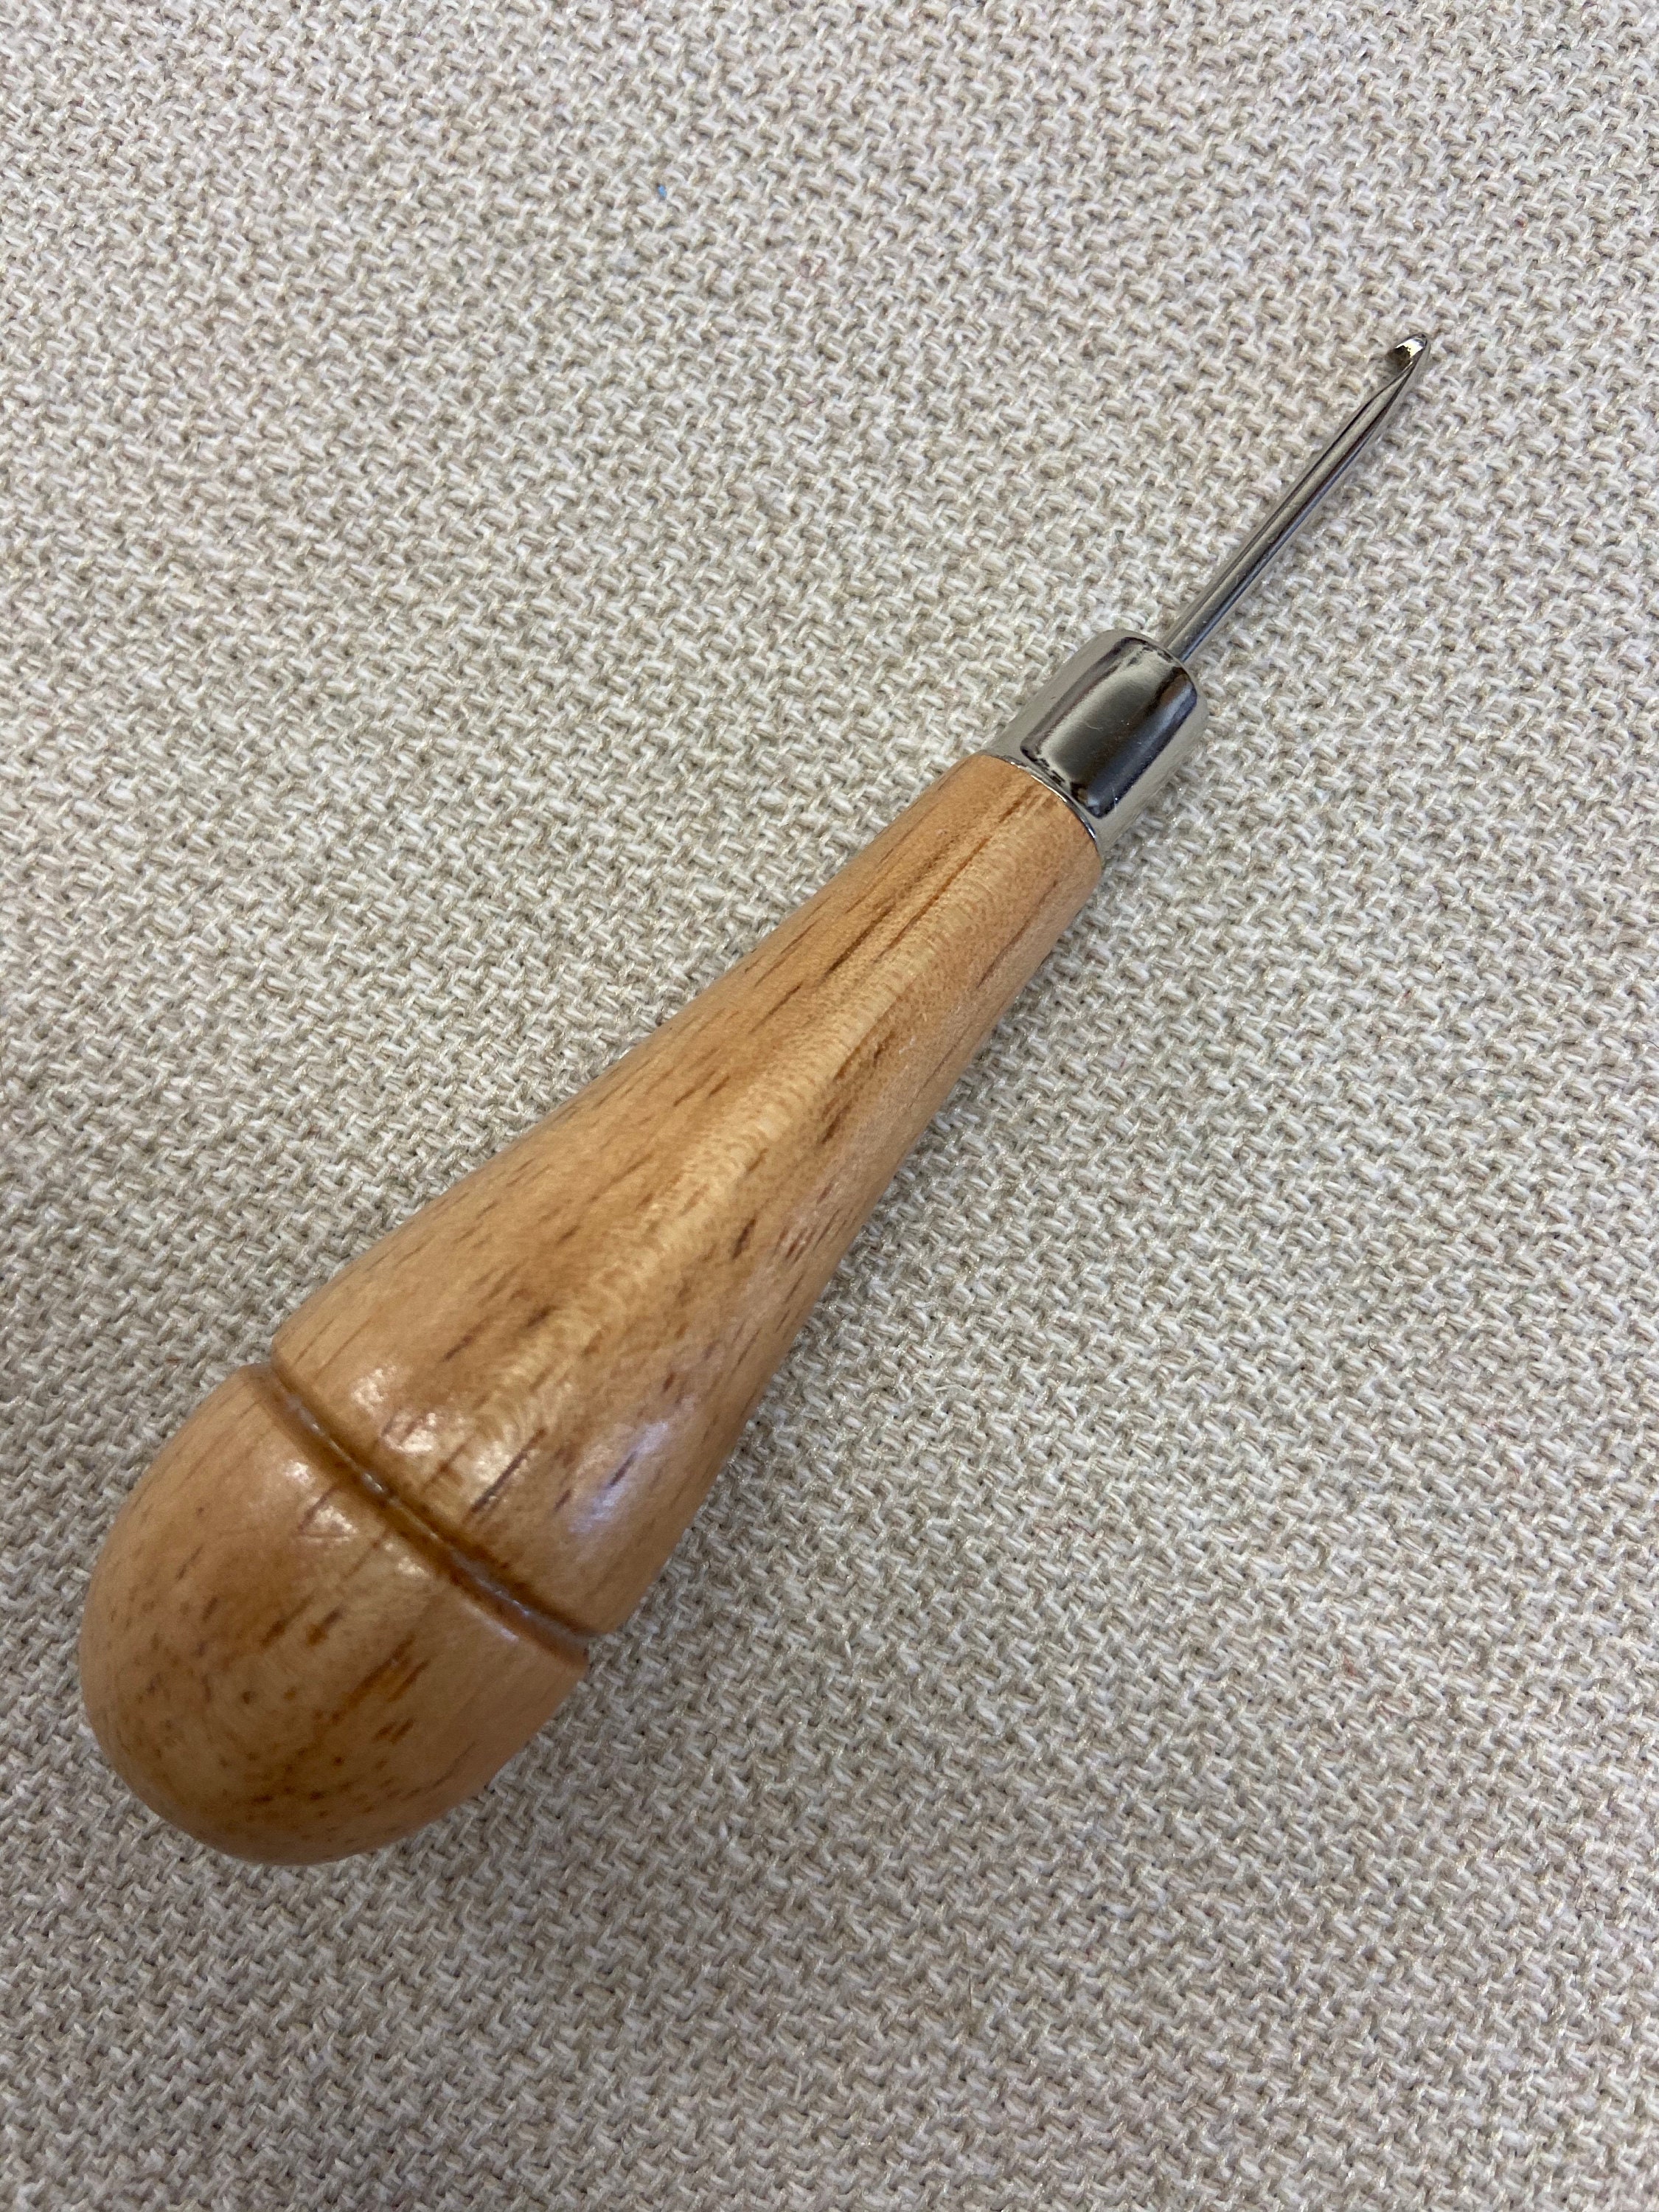 Wooden Rug Hook Tool for Primitive Rug Hooking and Rug Making Free Shipping  for USA Customers 